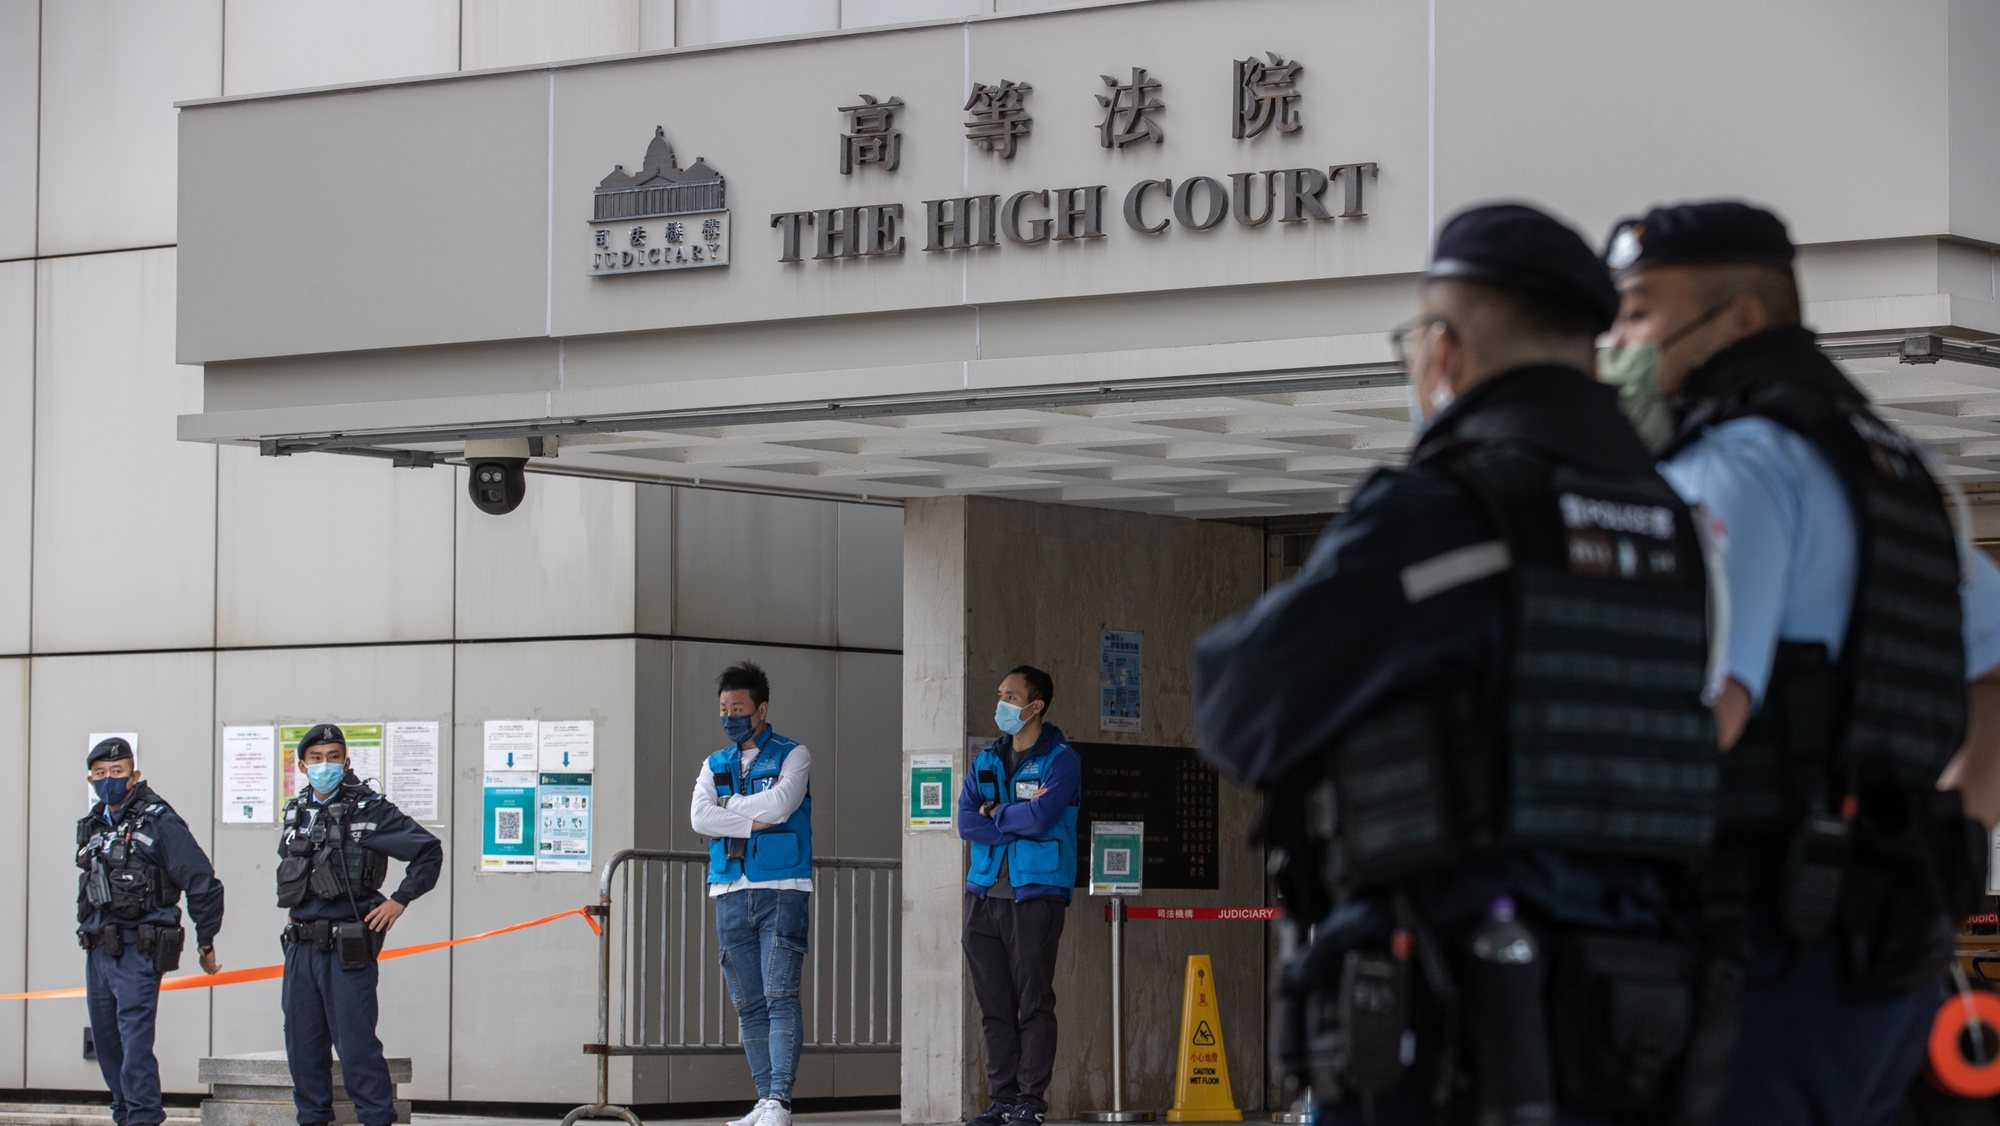 epa10340514 Police stand guard outside the High Court on the first day of the trial under national security law of media tycoon Jimmy Lai Chee-ying in Hong Kong, China, 01 December 2022. Lai is being tried under the national security law for conspiracy to print, publish, sell, offer for sale, distribute, display and/or reproduce seditious publications. Hong Kong Chief Executive John Lee Ka-chiu has asked the National Peopleâ€™s Congress (NPC) Standing Committee, Beijingâ€™s top legislative body, to interpret the cityâ€™s national security law after the Court of Final Appeal upheld a decision allowing a British barrister to defend Lai. The trial has been adjourned to 13 December 2022.  EPA/JEROME FAVRE